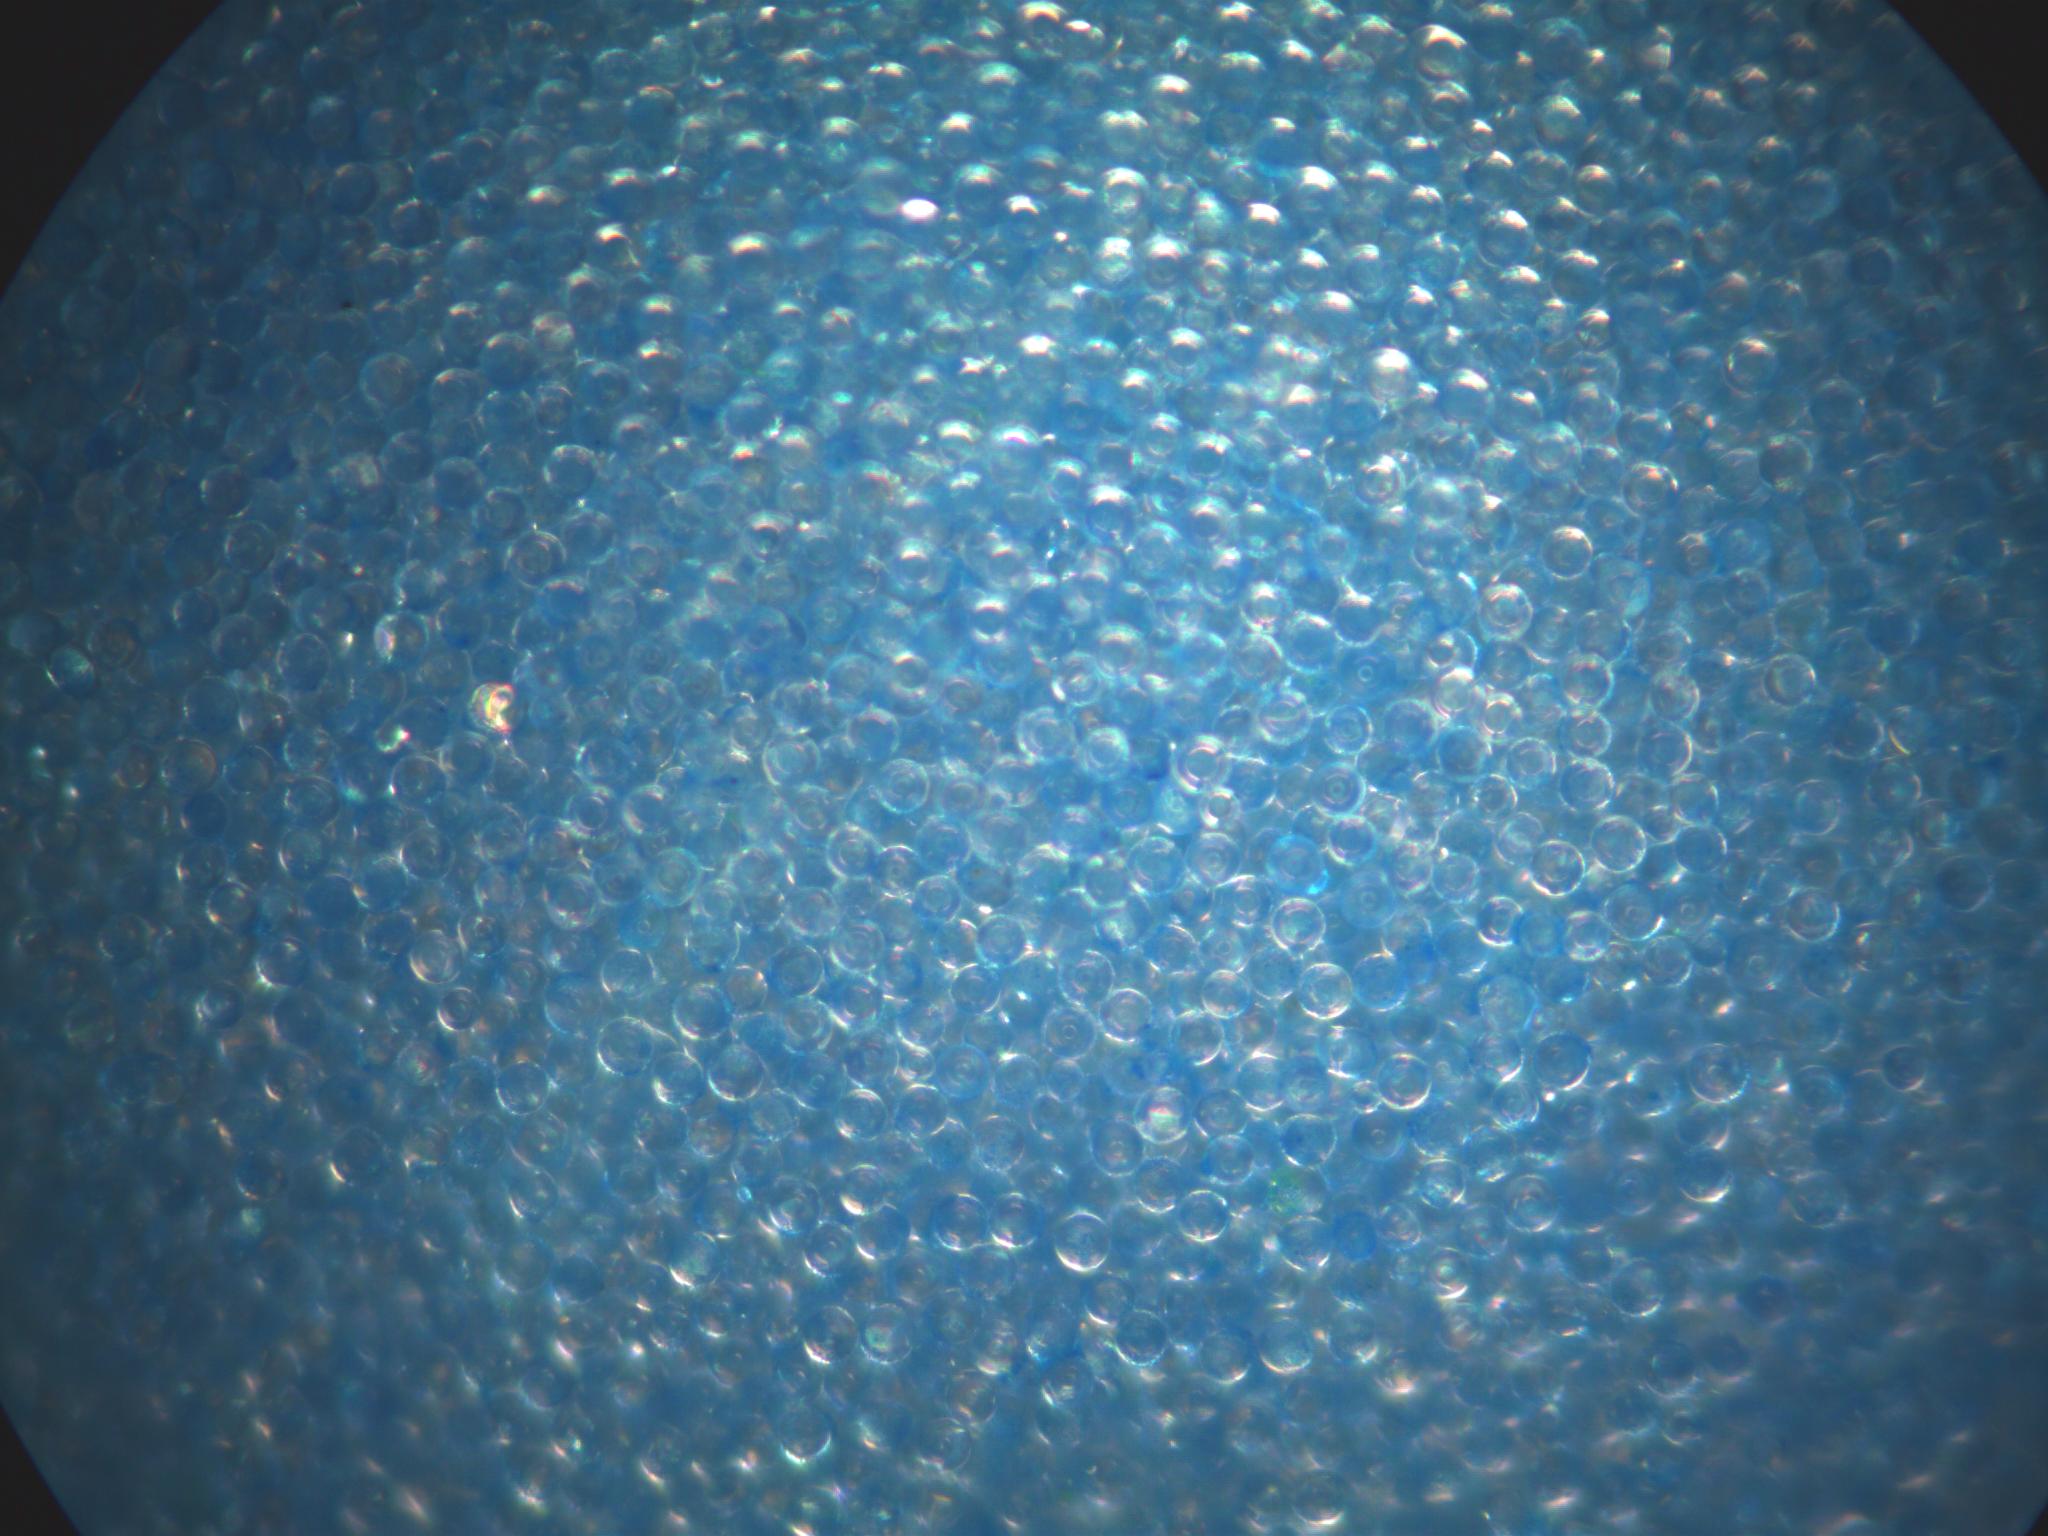 Blue Fluorescent Hemispherical Coating on Solid Glass Microspheres 45-53 micron - 100X magnification